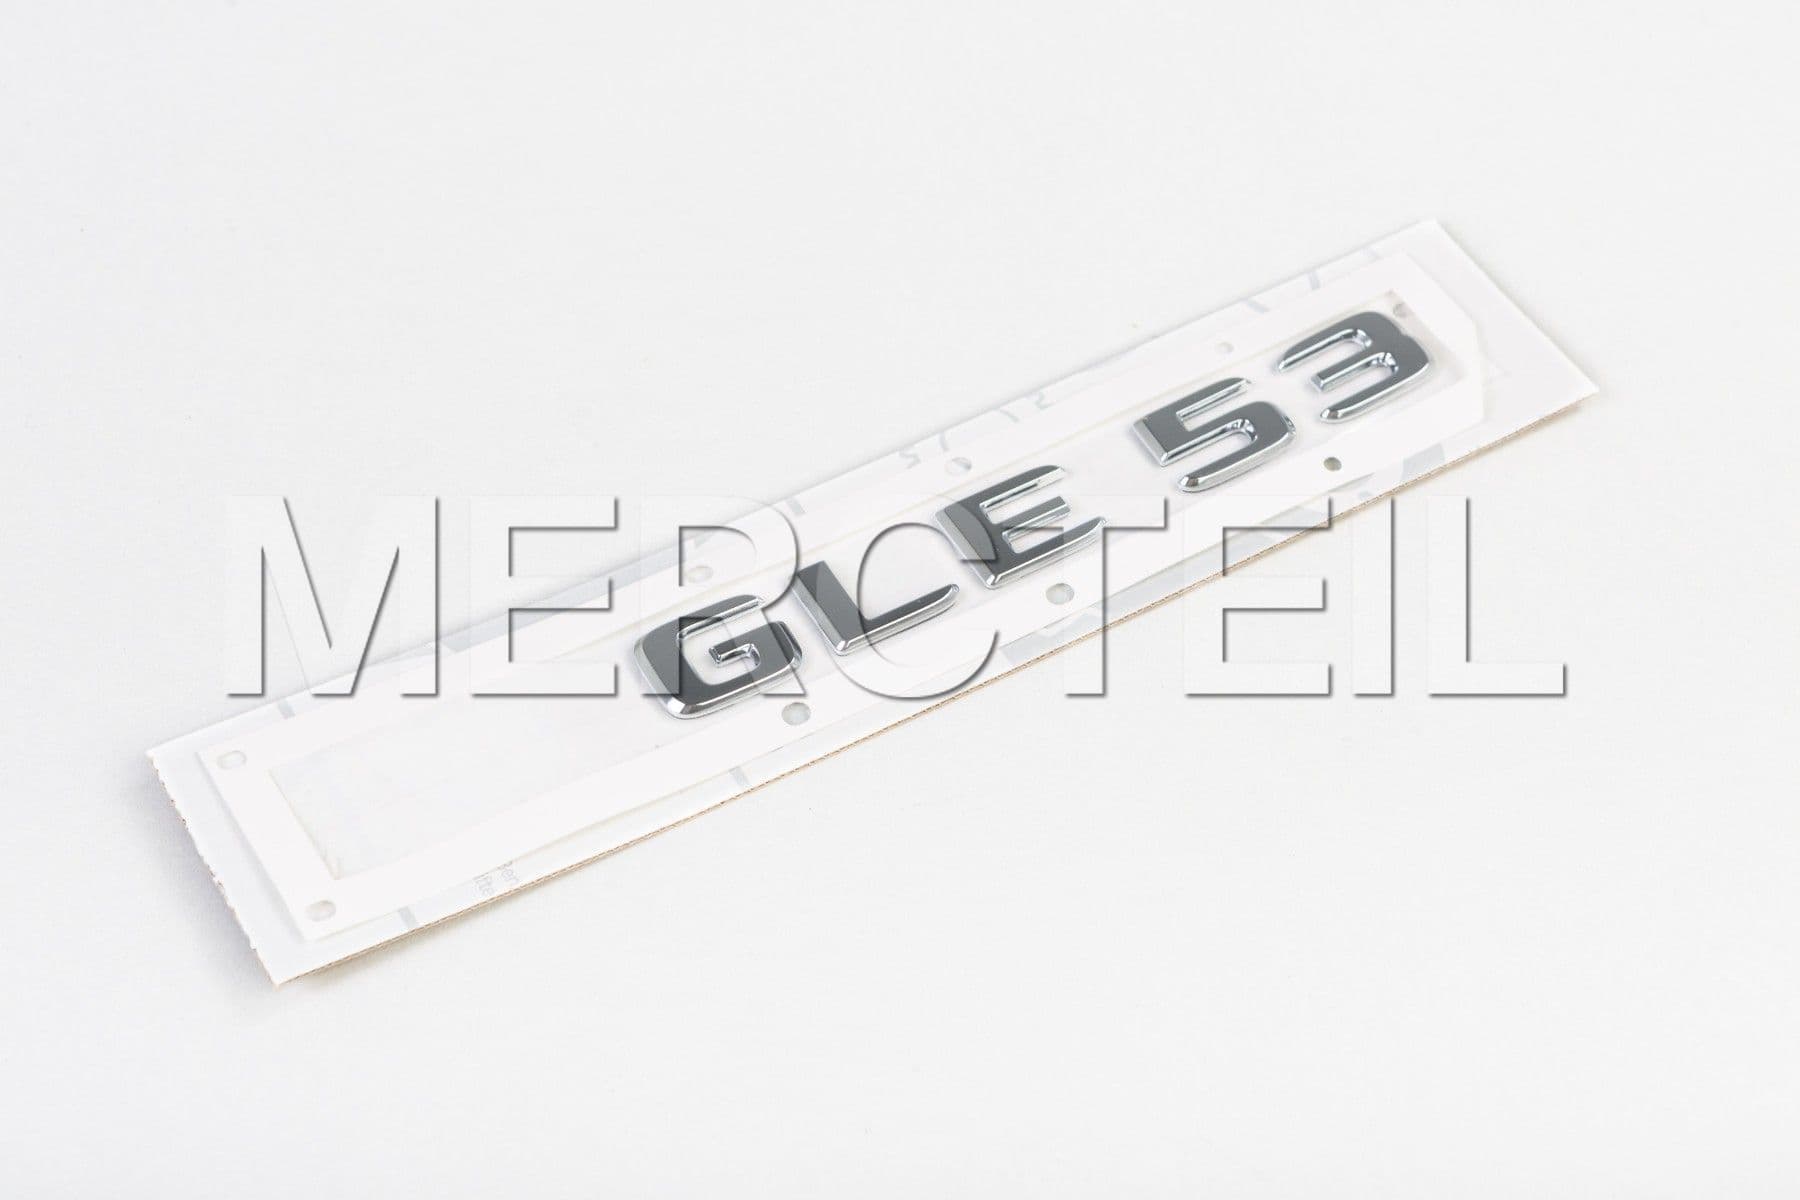 GLE53 AMG Adhesive Label Genuine Mercedes AMG (part number: A1678176800)